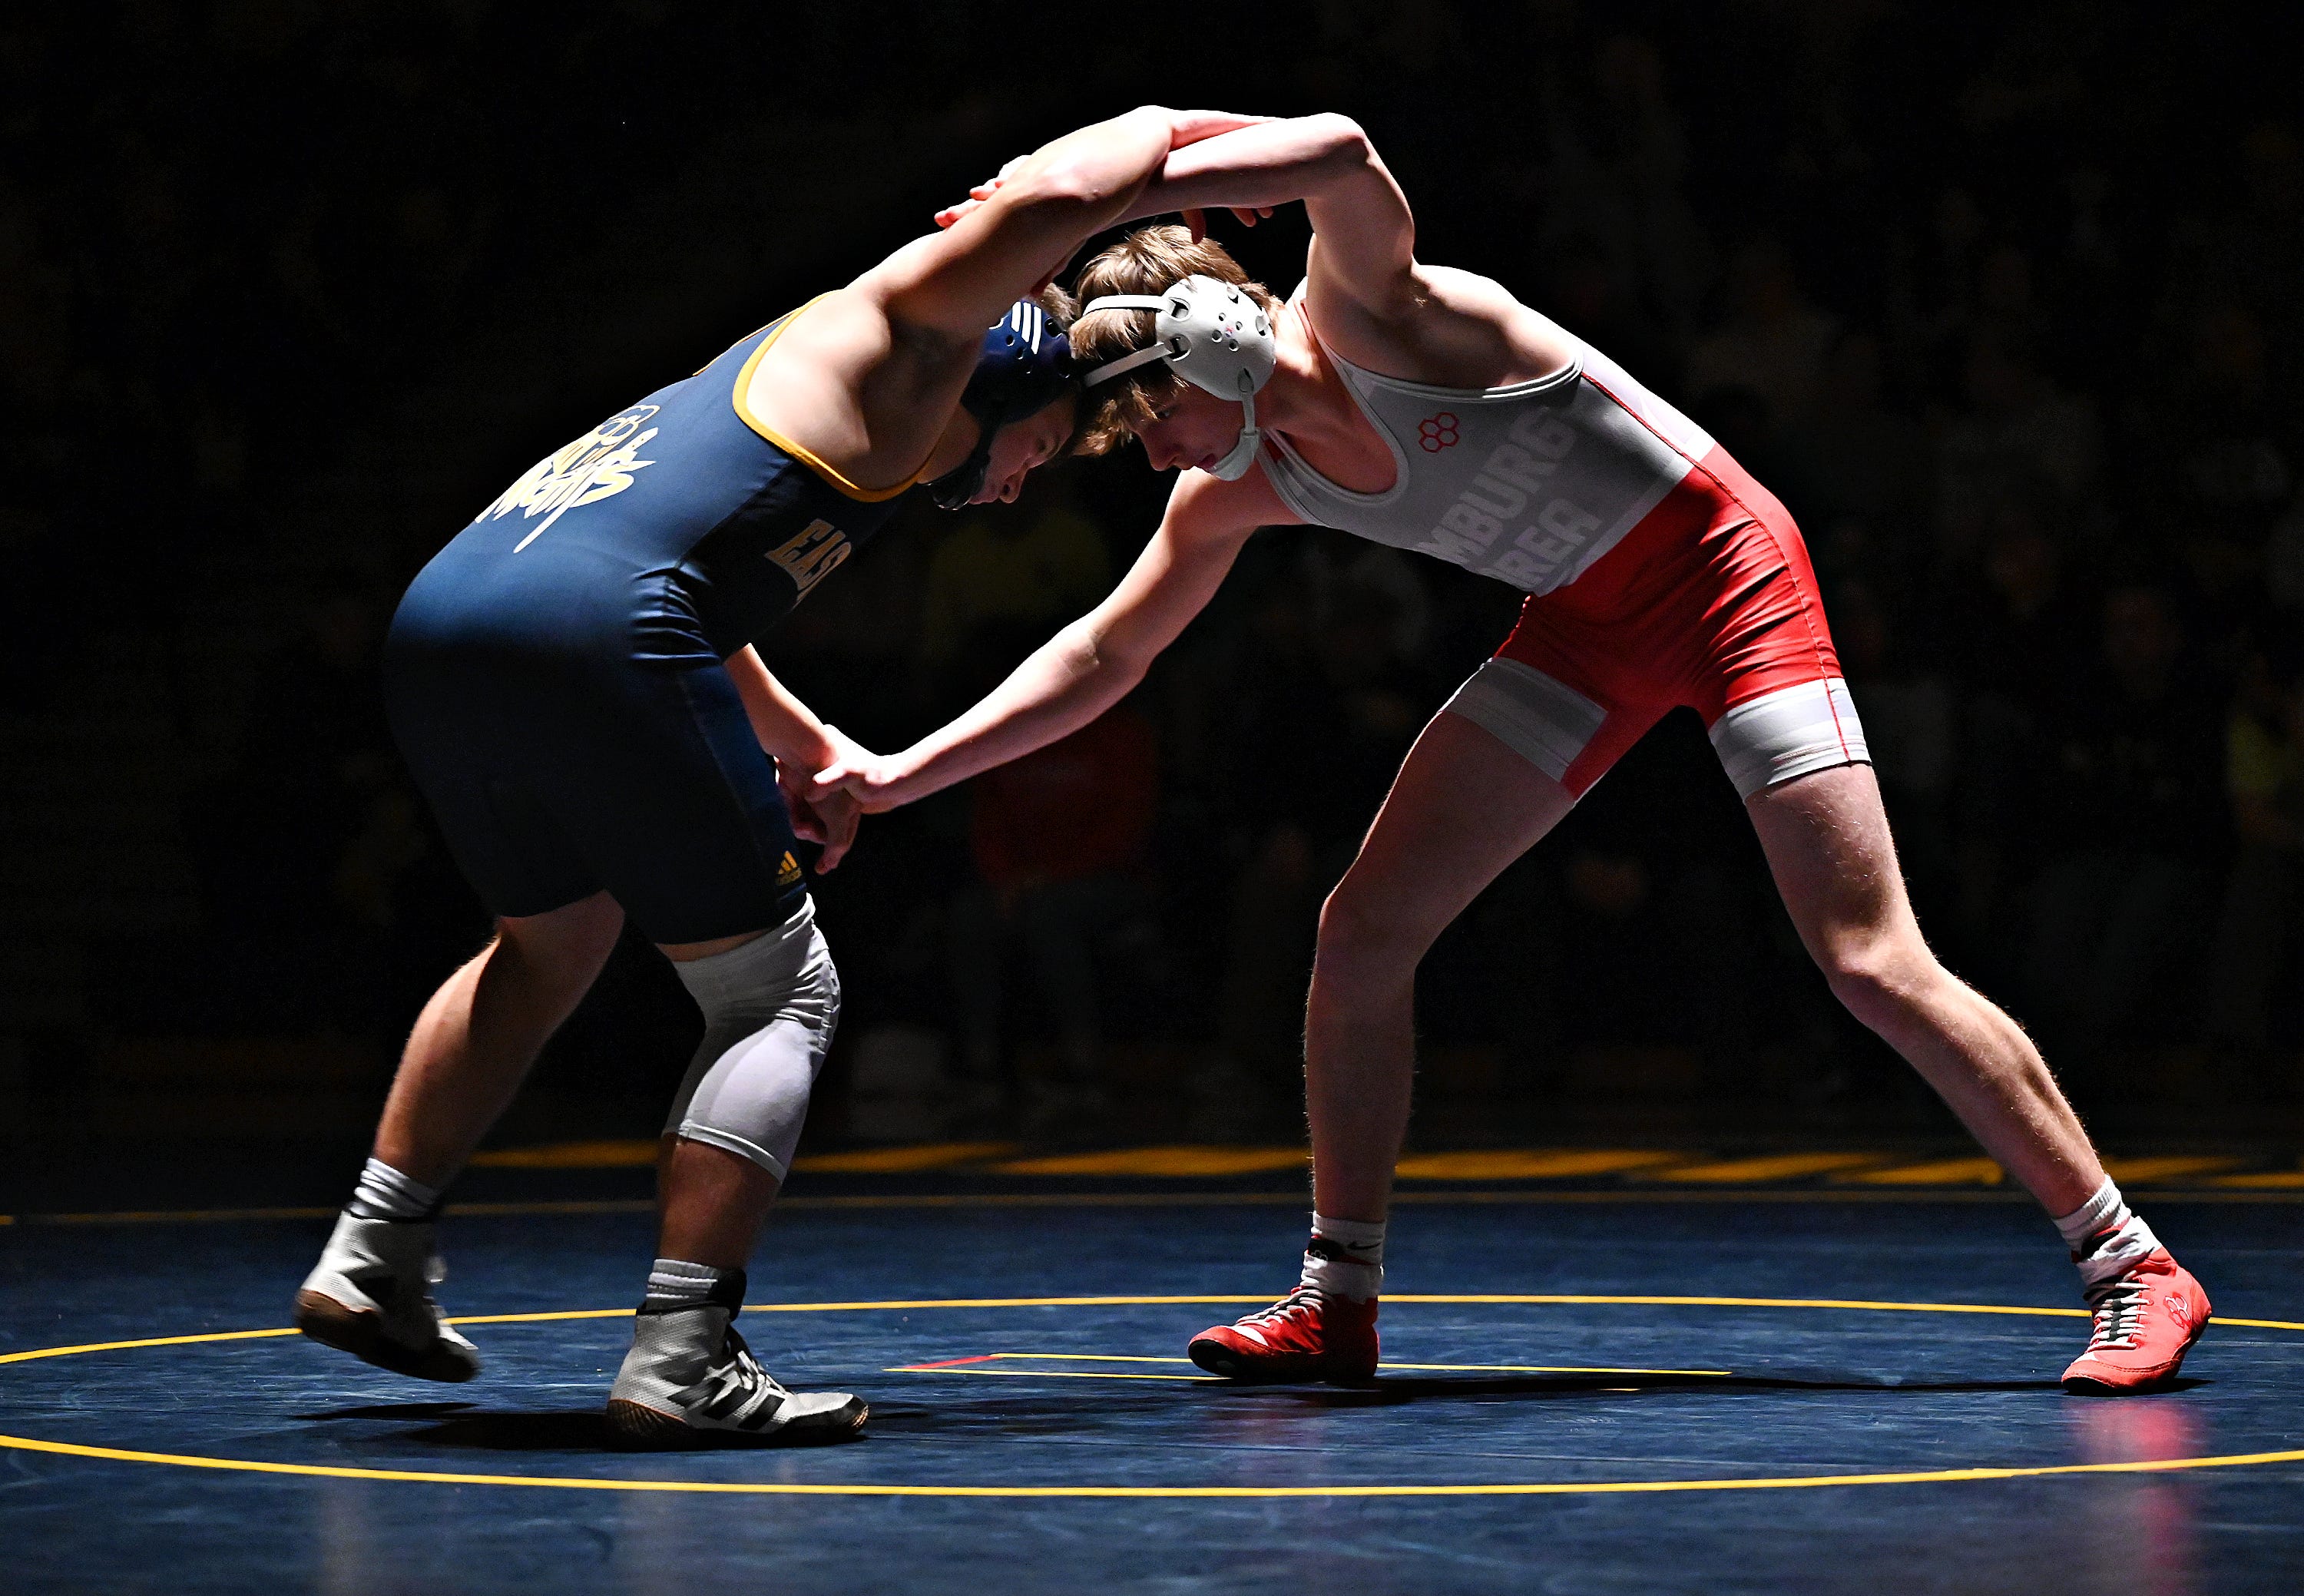 Eastern York’s Ethan Sgrignoli, left, and Hamburg’s Cohen Correll compete in the 172-pound weight class during PIAA District 3, Class 2-A first round wrestling action at Eastern York High School in Lower Windsor Township, Monday, Jan. 30, 2023. Correll would win the match and Eastern York would win the meet 50-22. Dawn J. Sagert photo